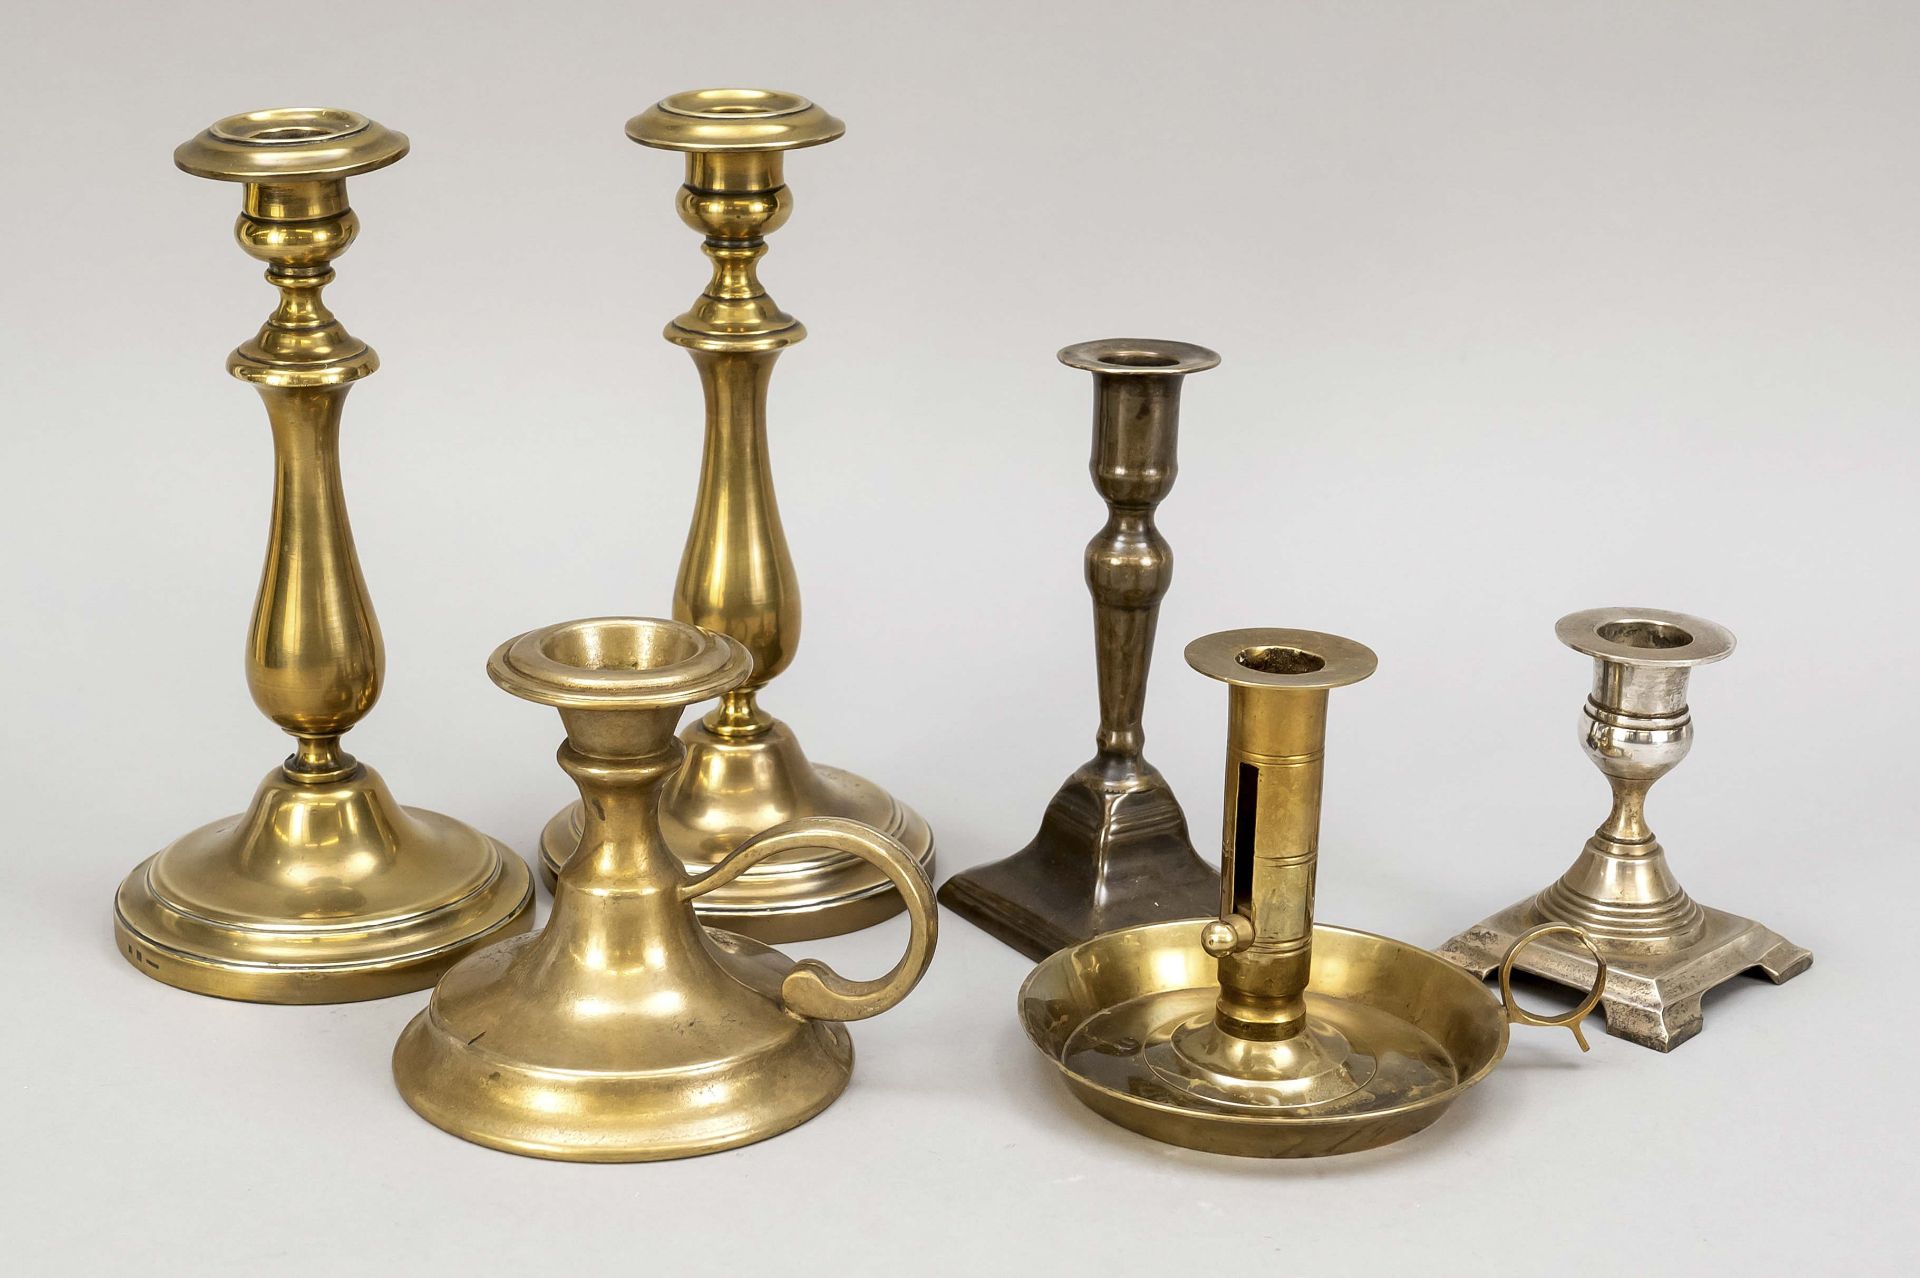 Set of candlesticks, 19th/20th c., brass, bronze. Of which 1 pair. H. to 22 cm